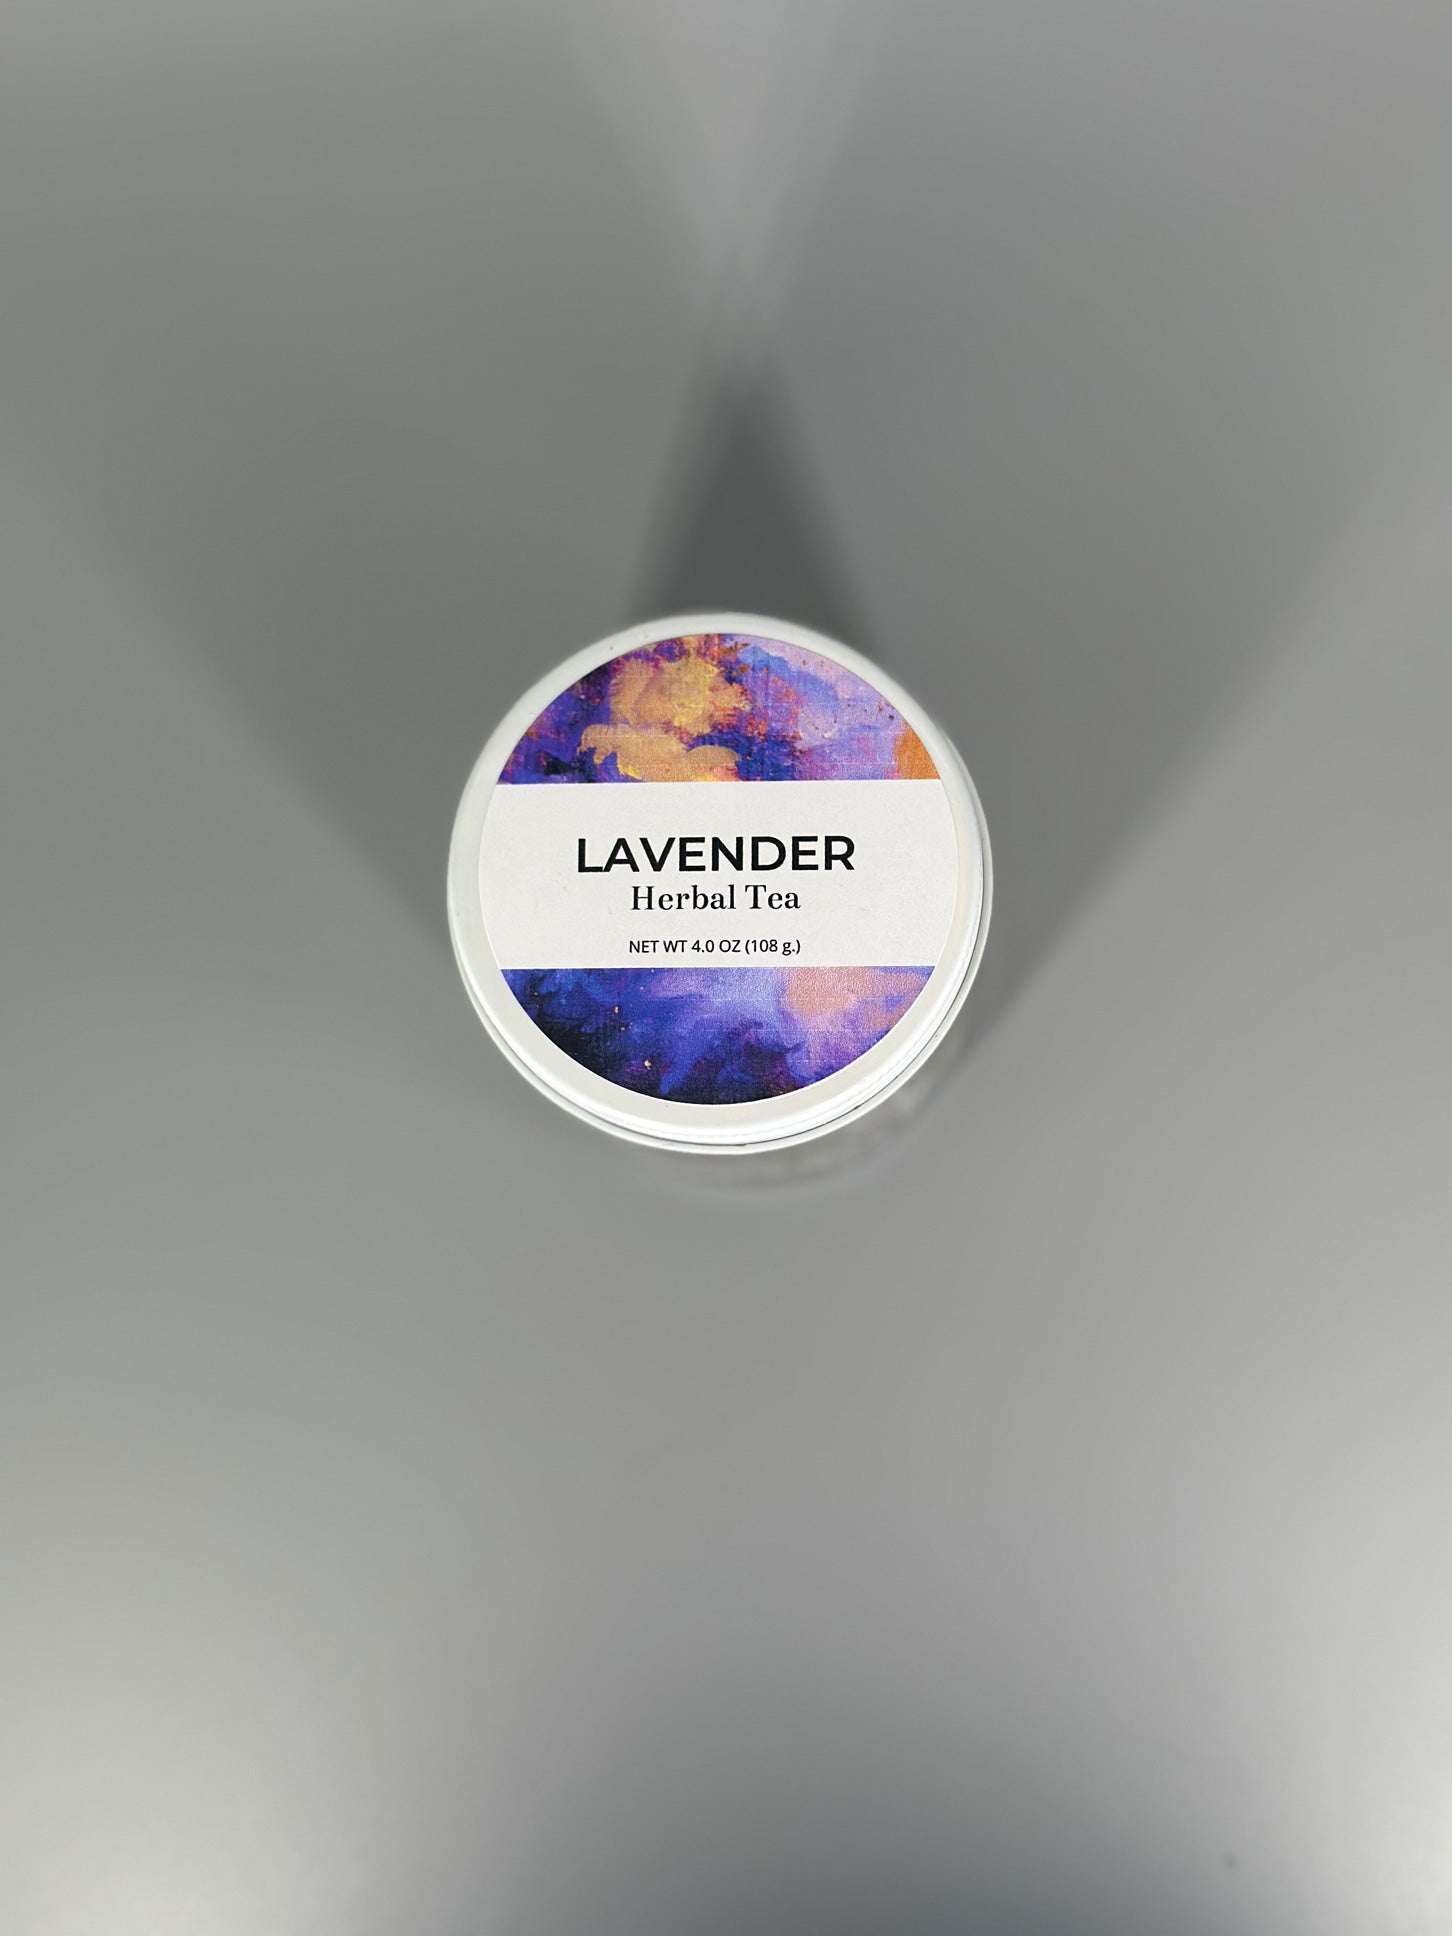 Chicory Tea Co.'s Lavender Mint in the jar, view from top